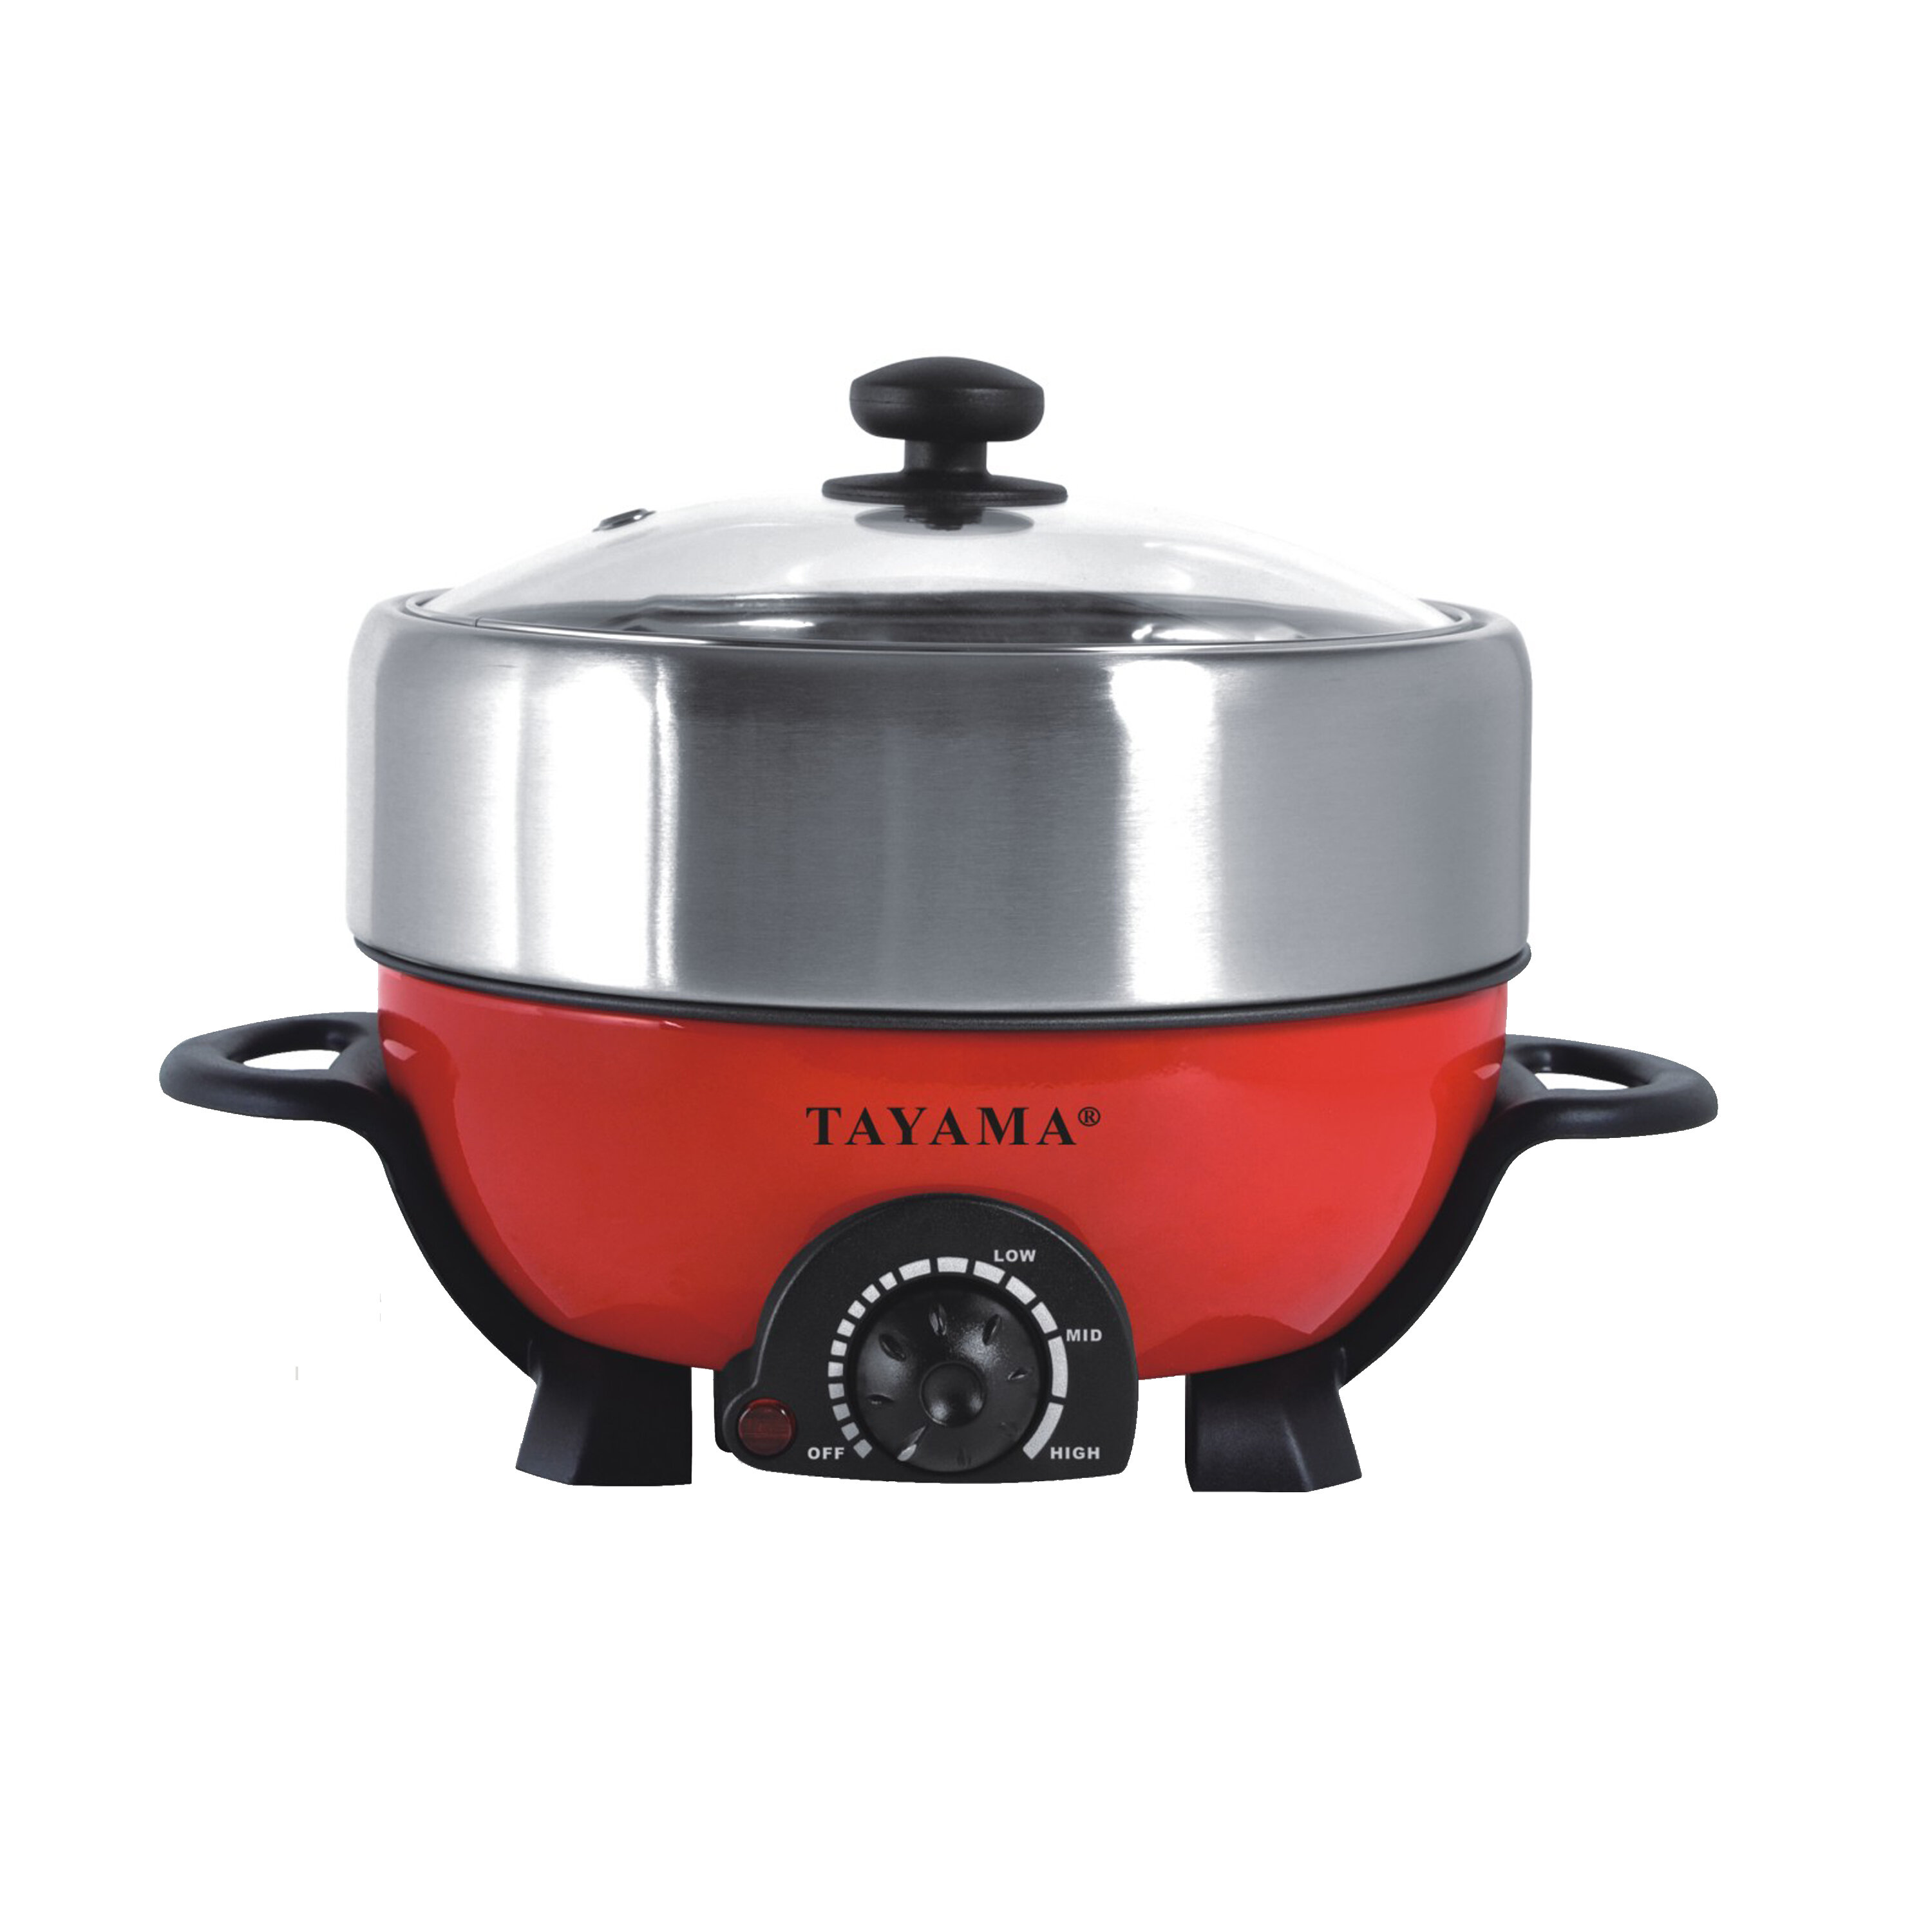 Courant 3.2 Quart Red Slow Cooker with Removabl e Ceramic Pot 